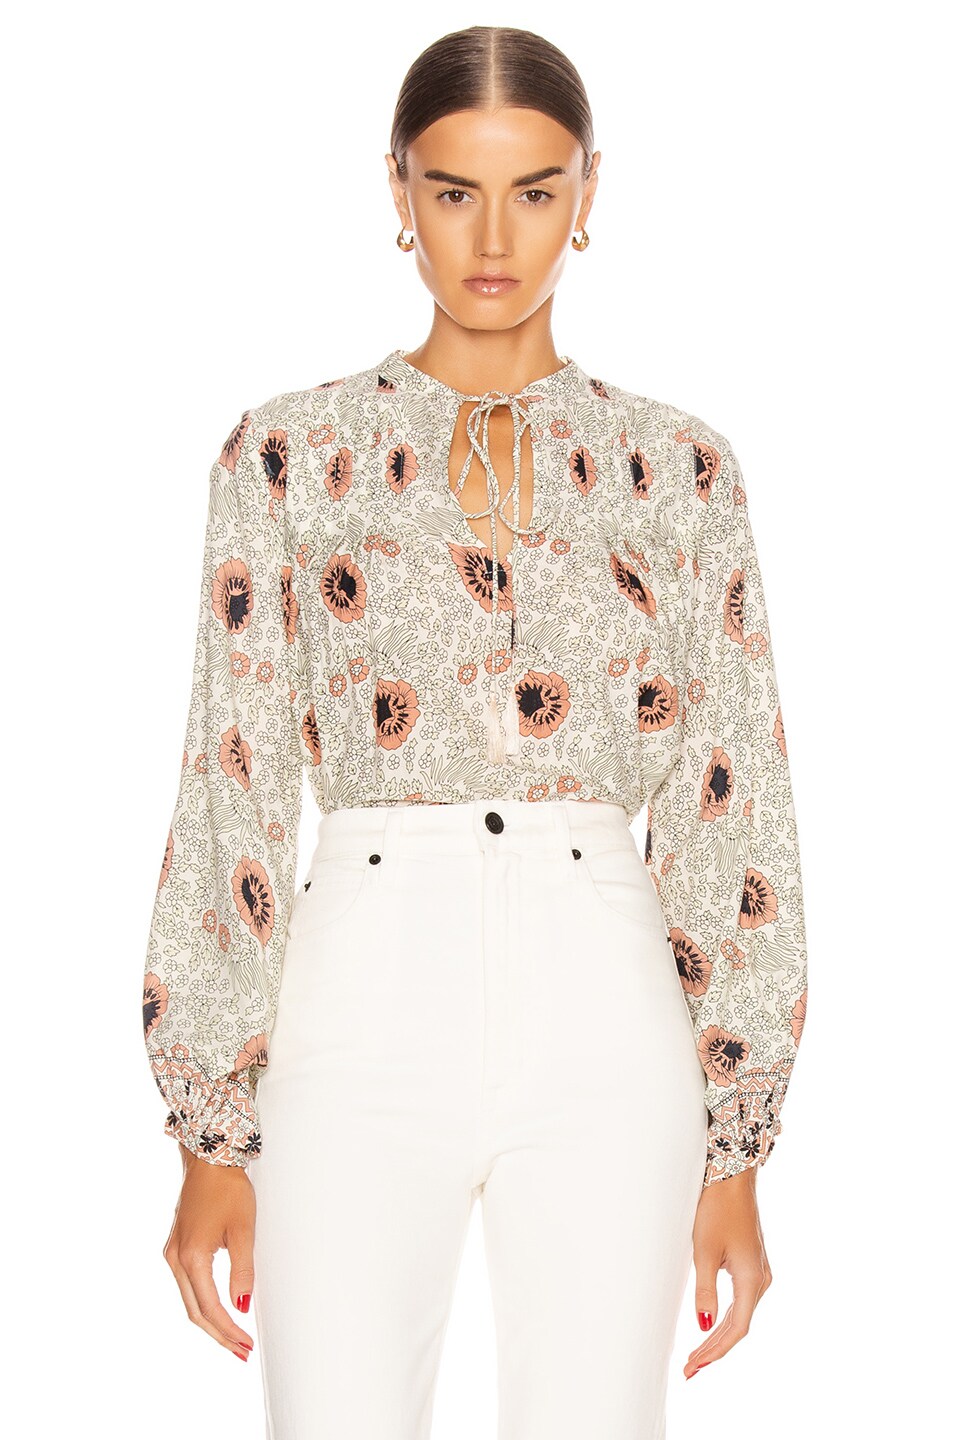 Natalie Martin Lizzy Shirt in Vintage Flowers Apricot | FWRD